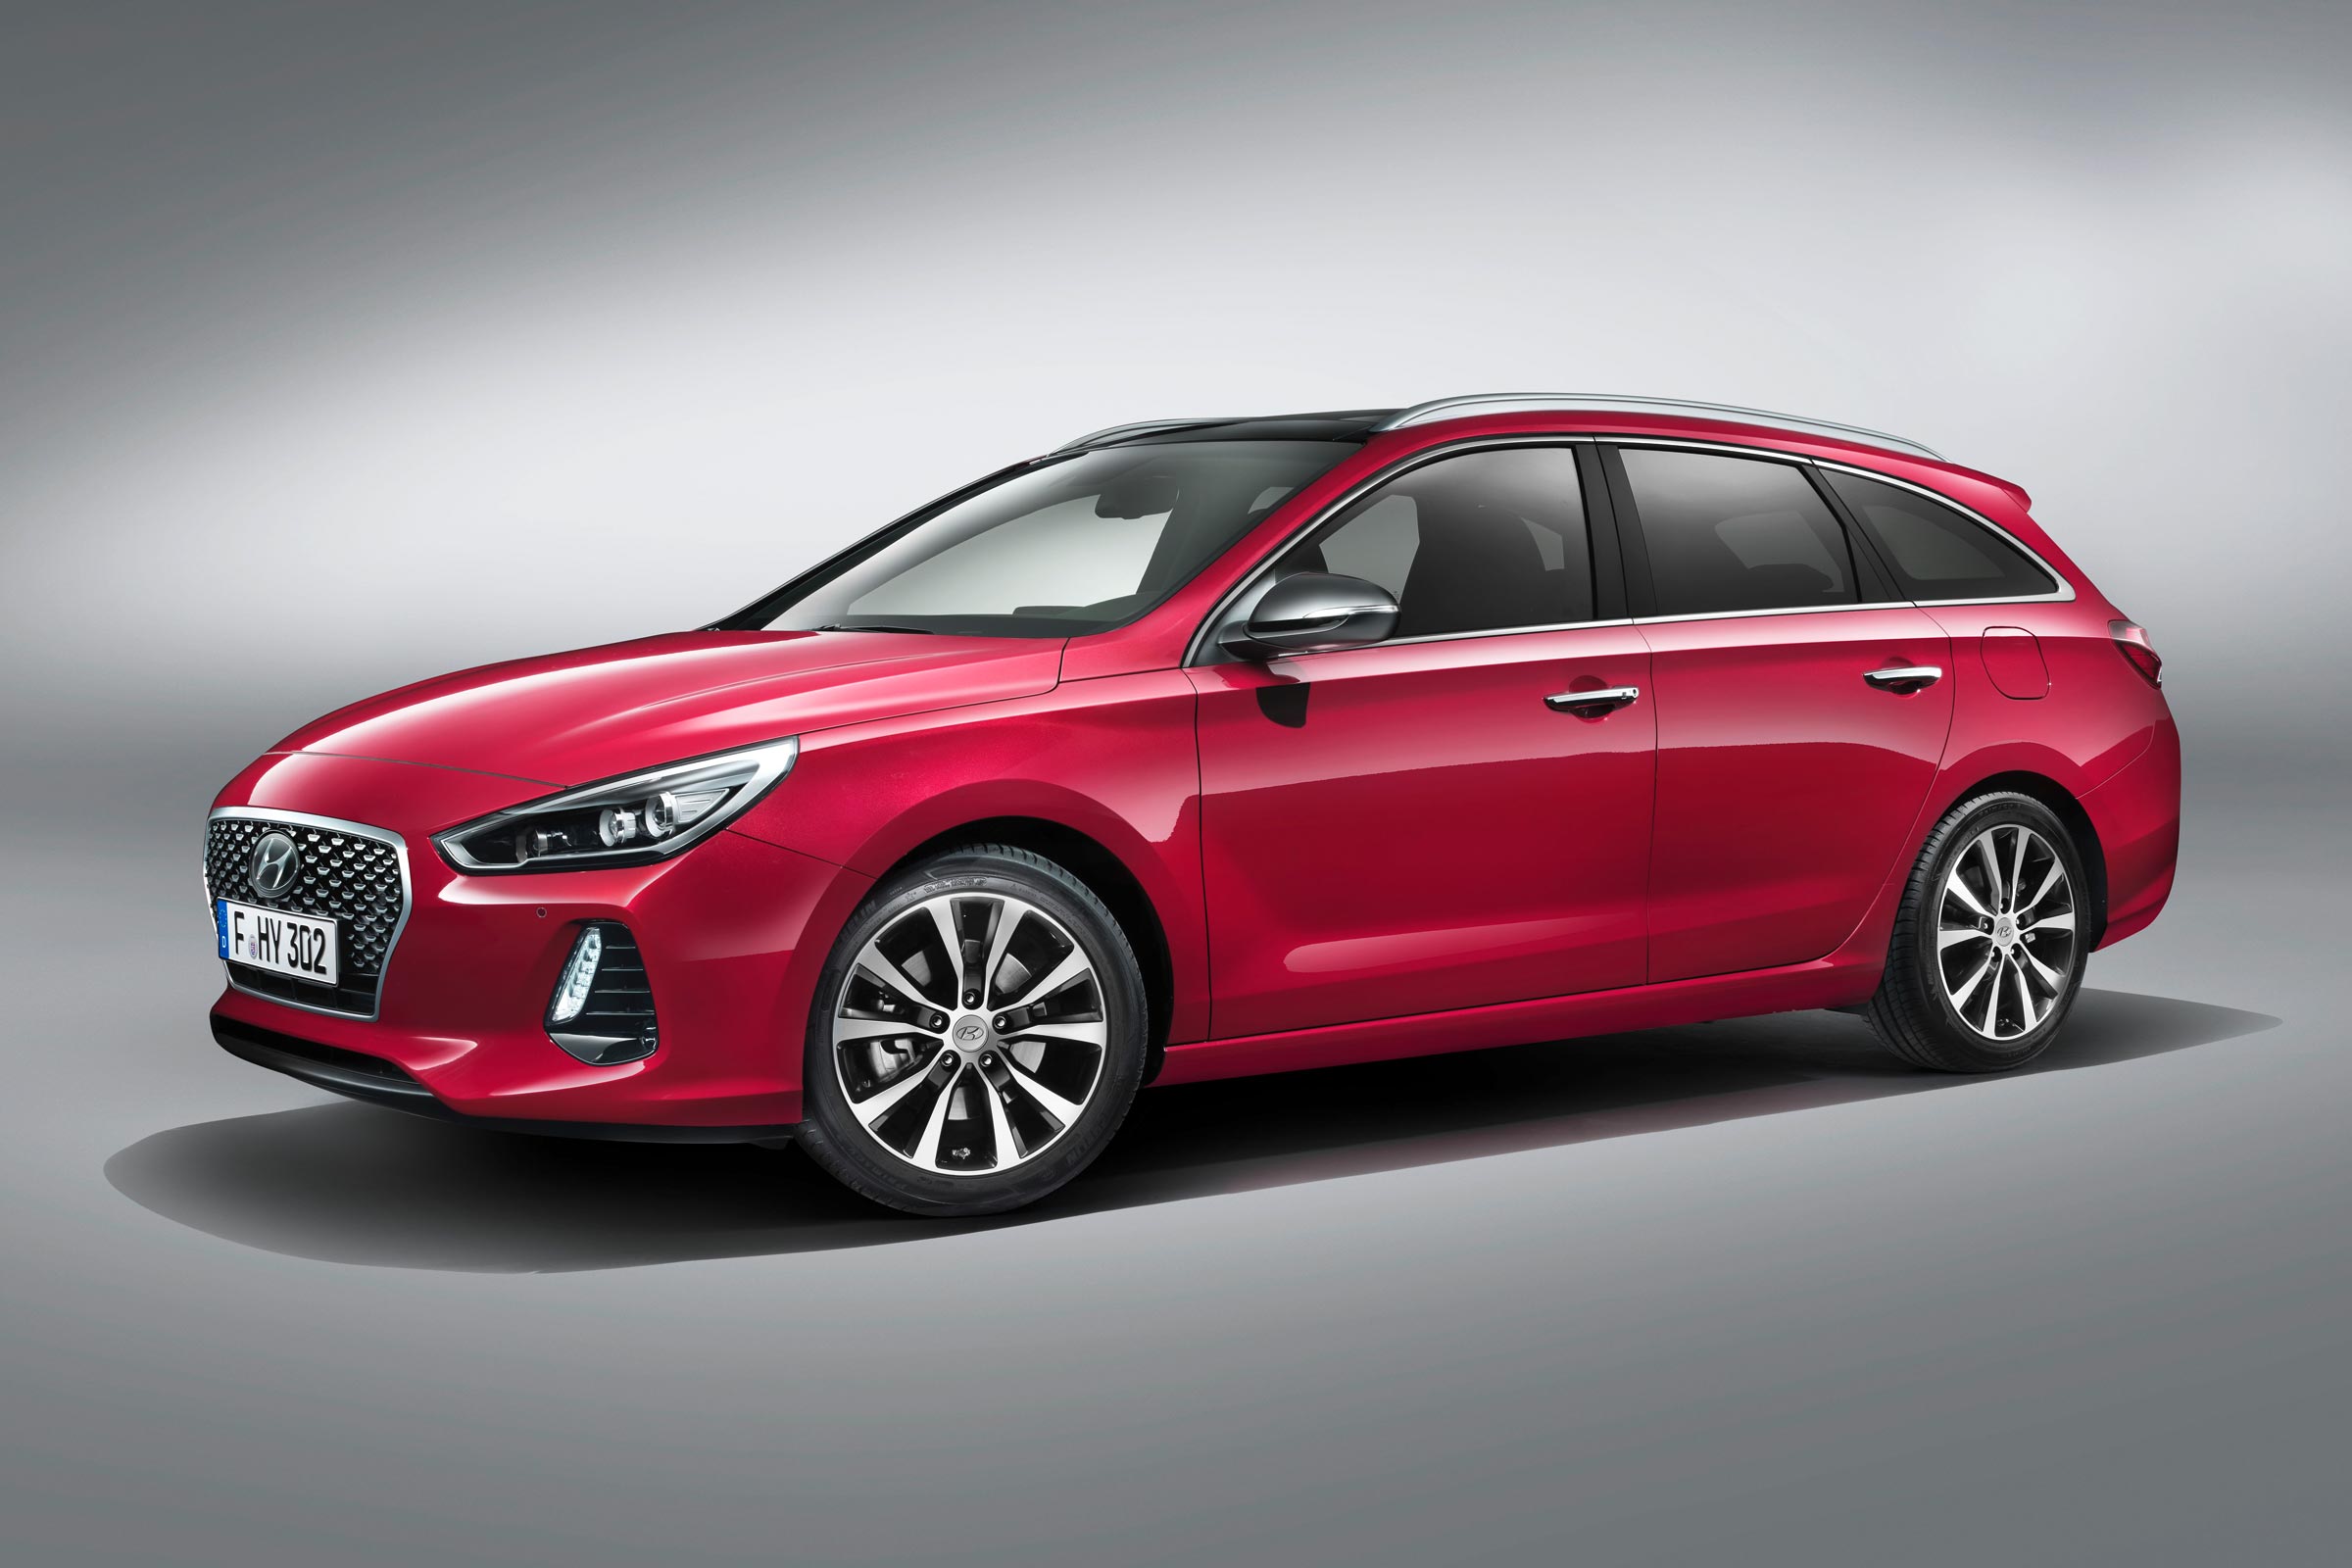 2017 Hyundai i30 Wagon estate release pictures Carbuyer